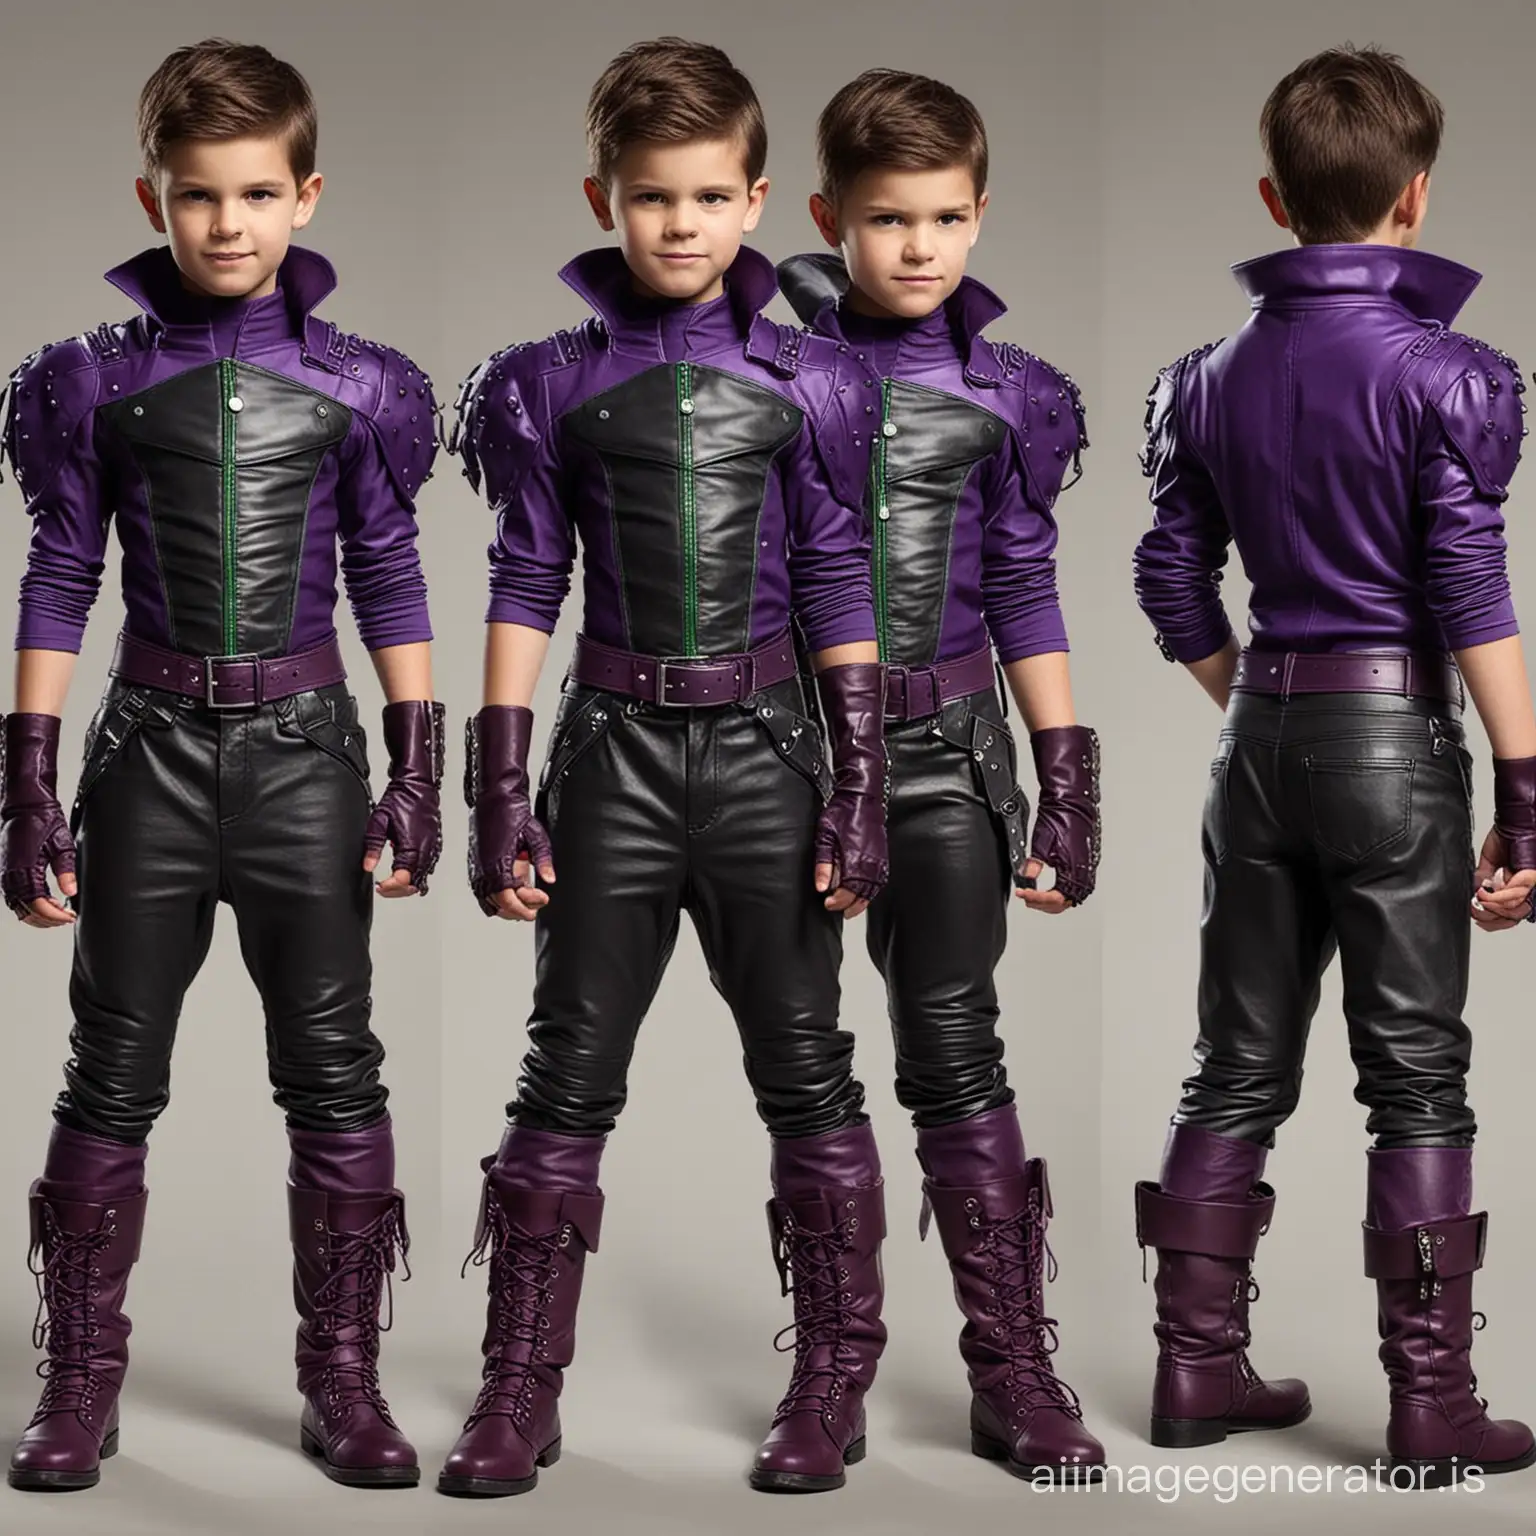 Create a villain outfit for a strong 8 year old boy villain with abs, cool, wicked, leather, shorts, comfortable yet intimidating, various shades of purple with hints of both green and red, both red and green should be included in every outfit but purple should be the main color, the boots should also be coloured and match the outfit